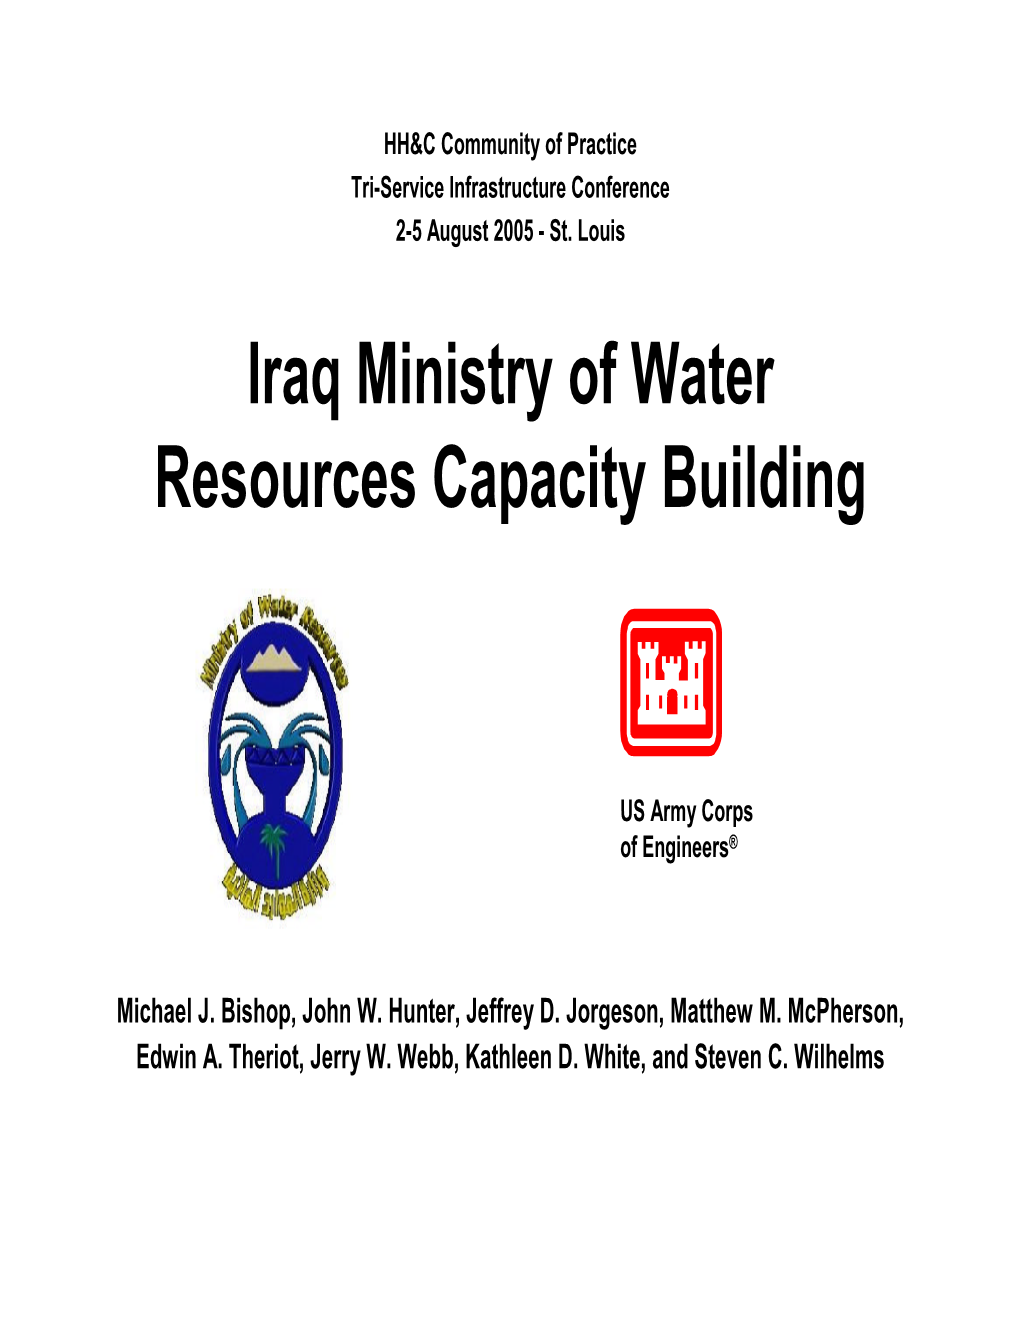 Iraq Ministry of Water Resources Capacity Building